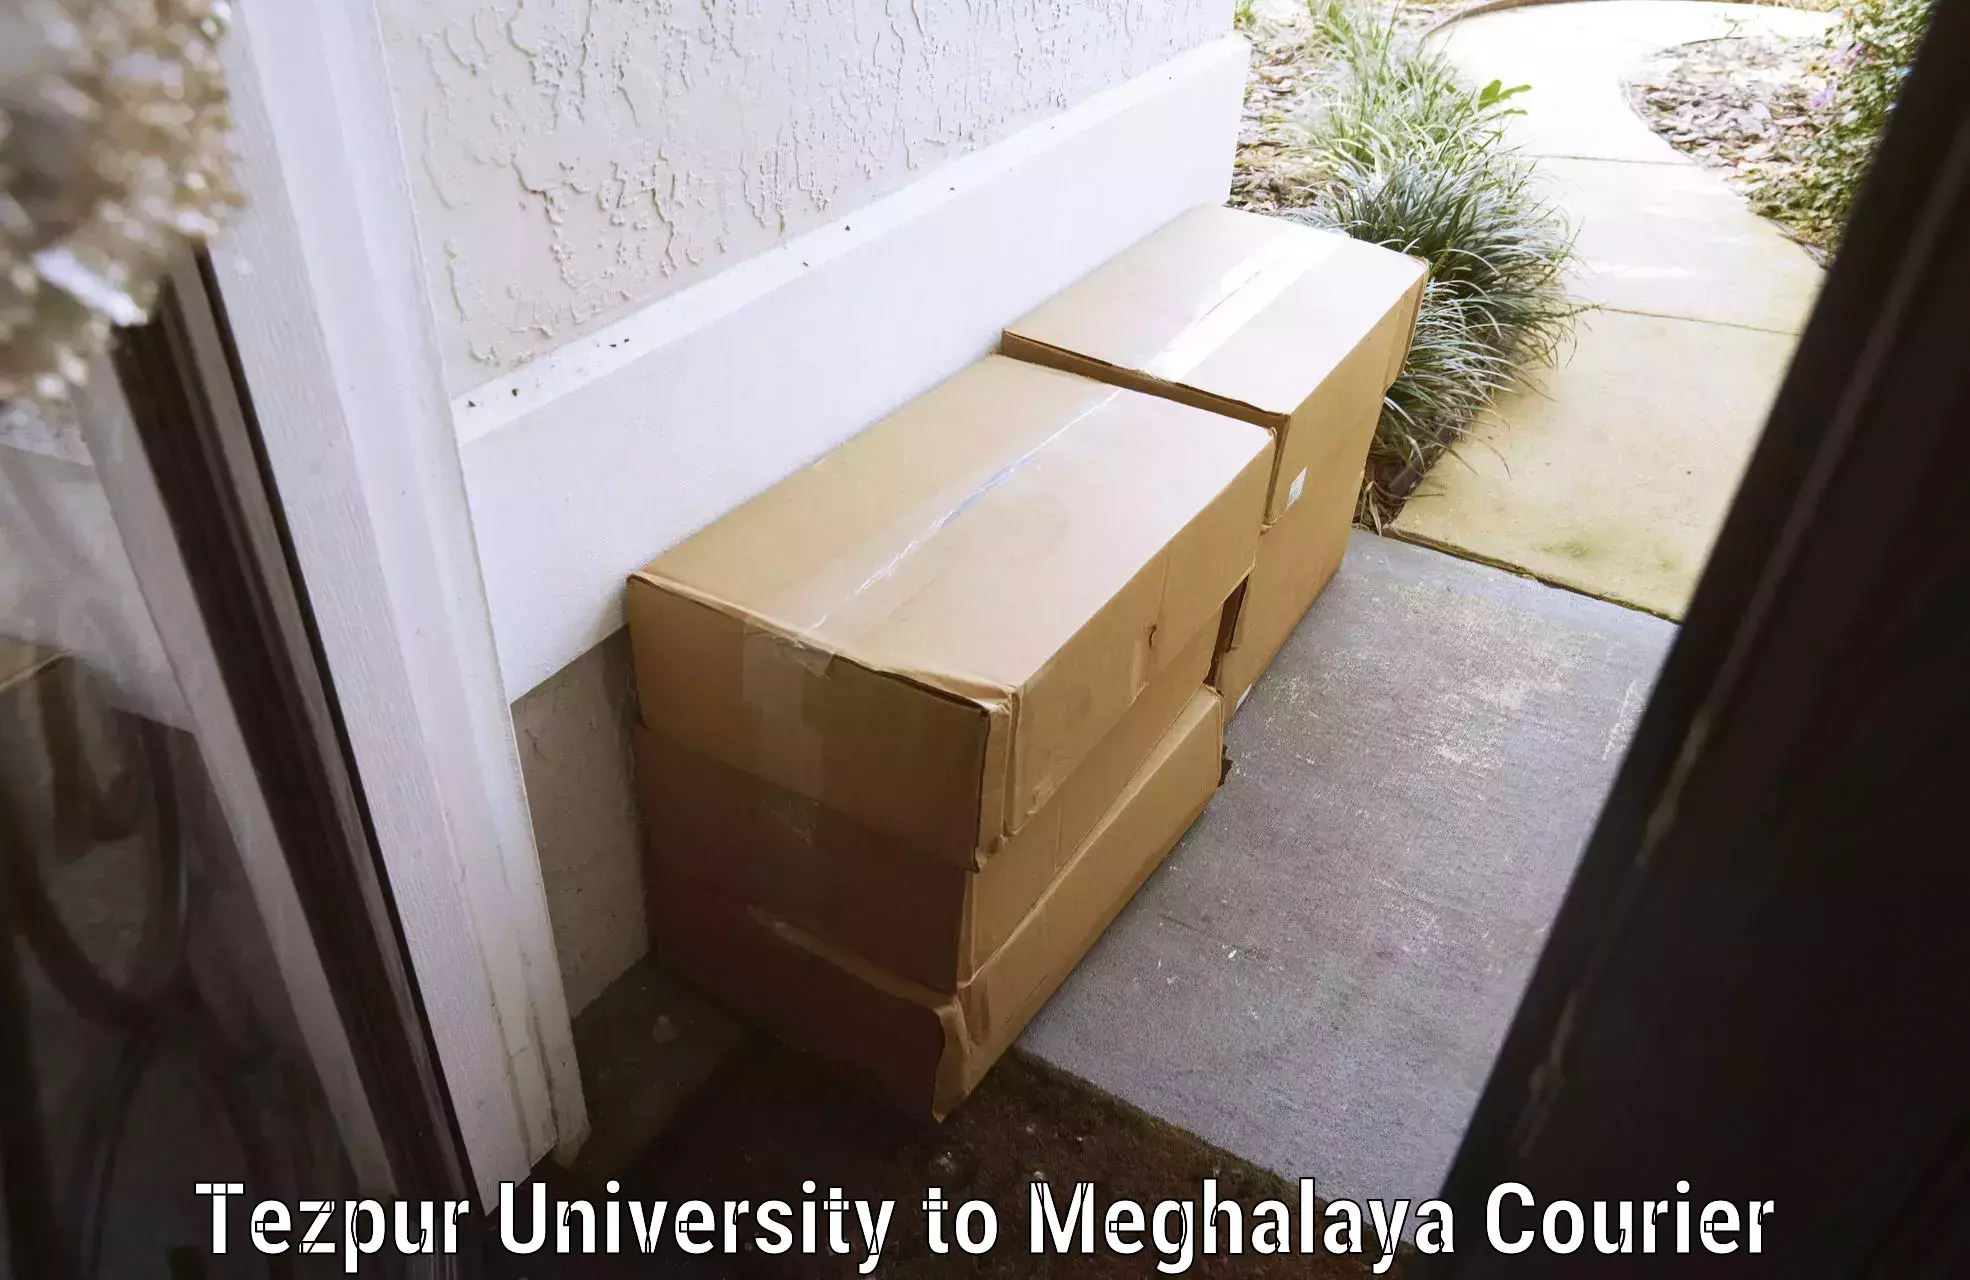 Door to door luggage delivery Tezpur University to Shillong